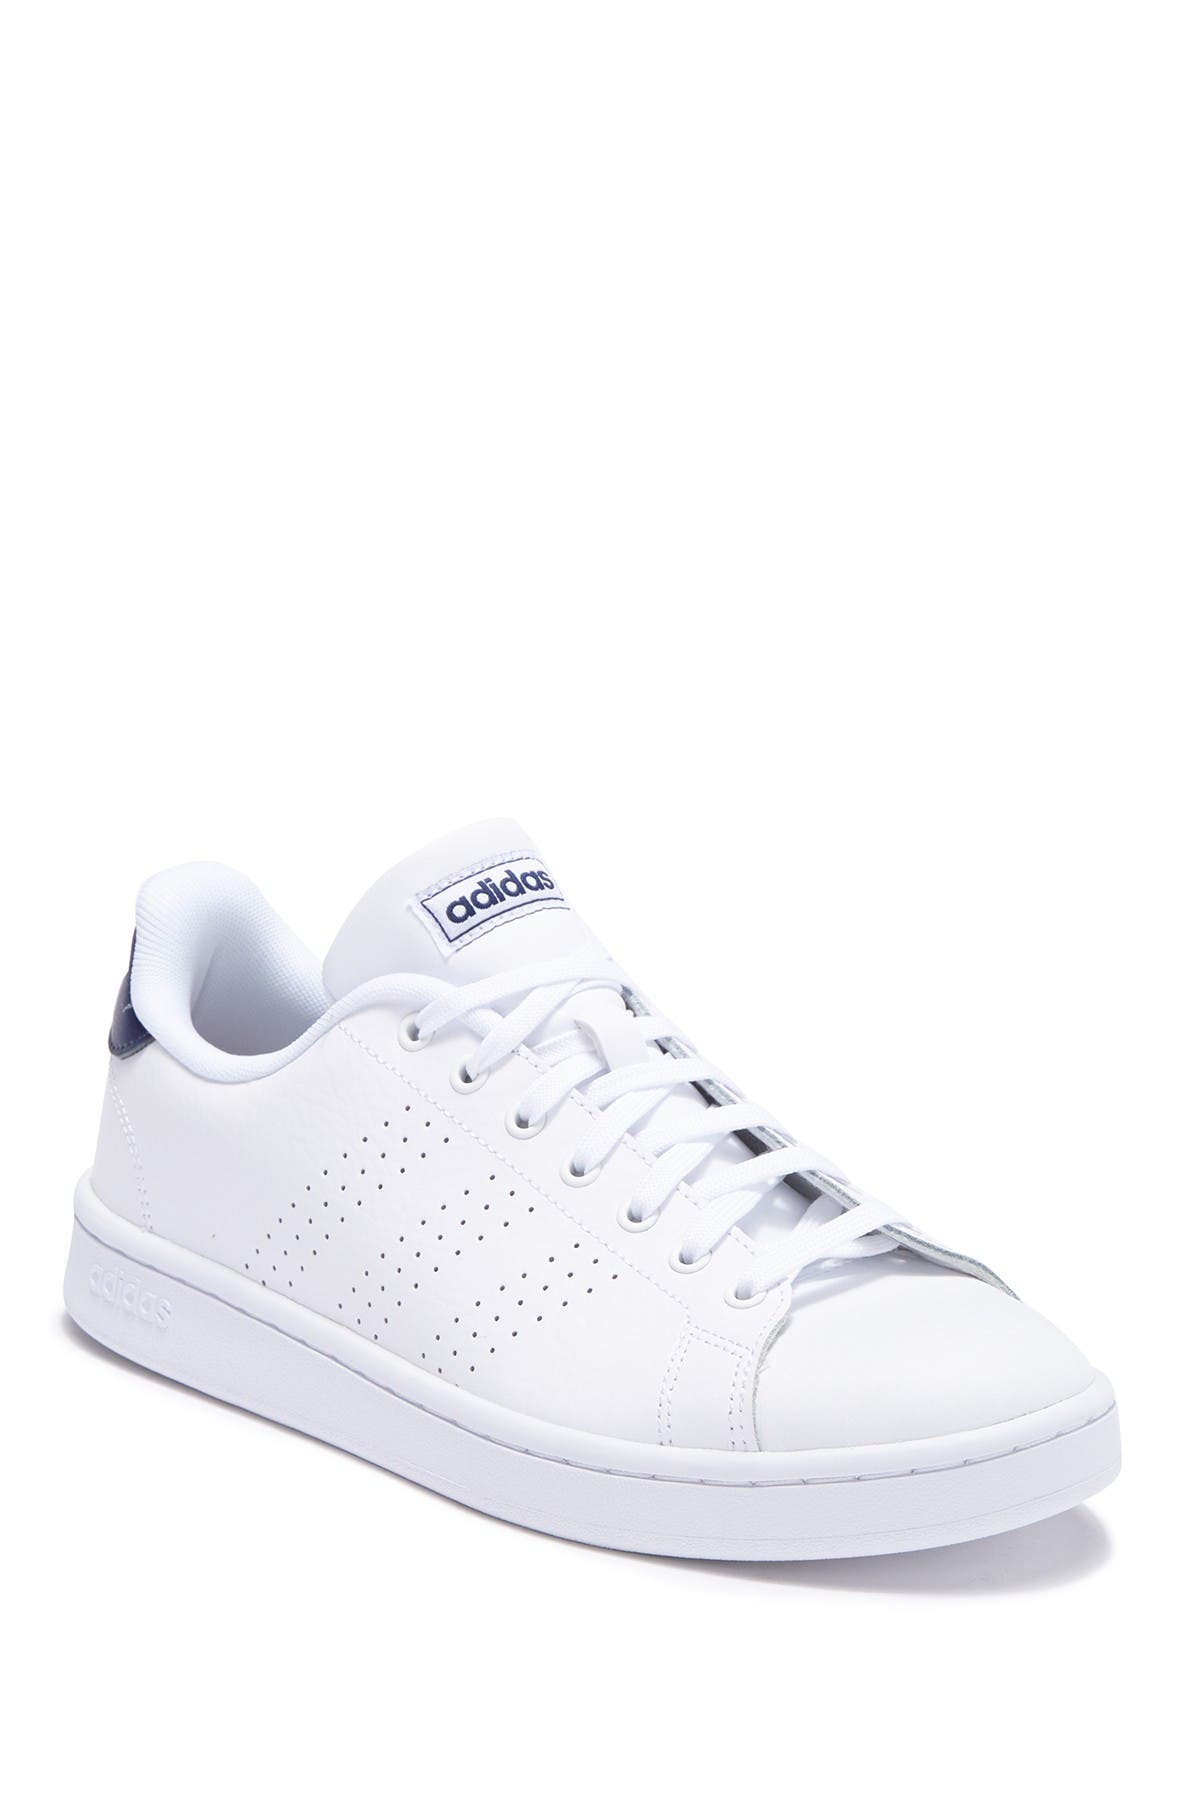 adidas leather white sneakers